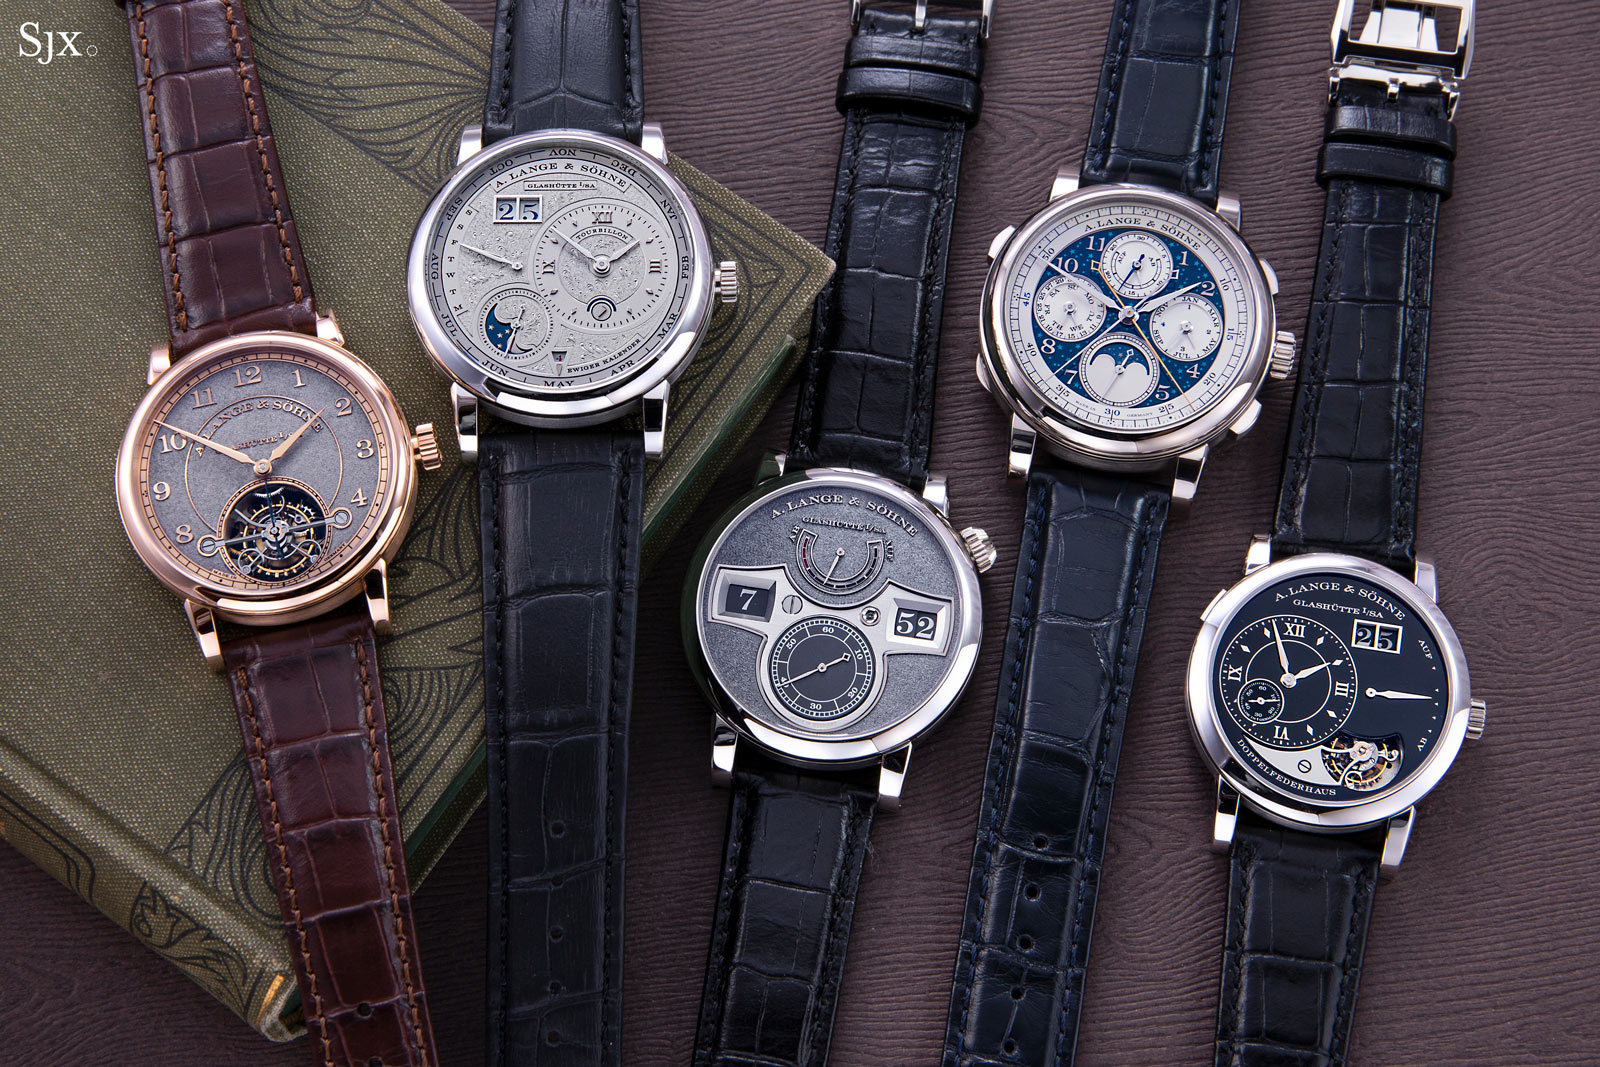 A.Lange & Sohne Replica Watches